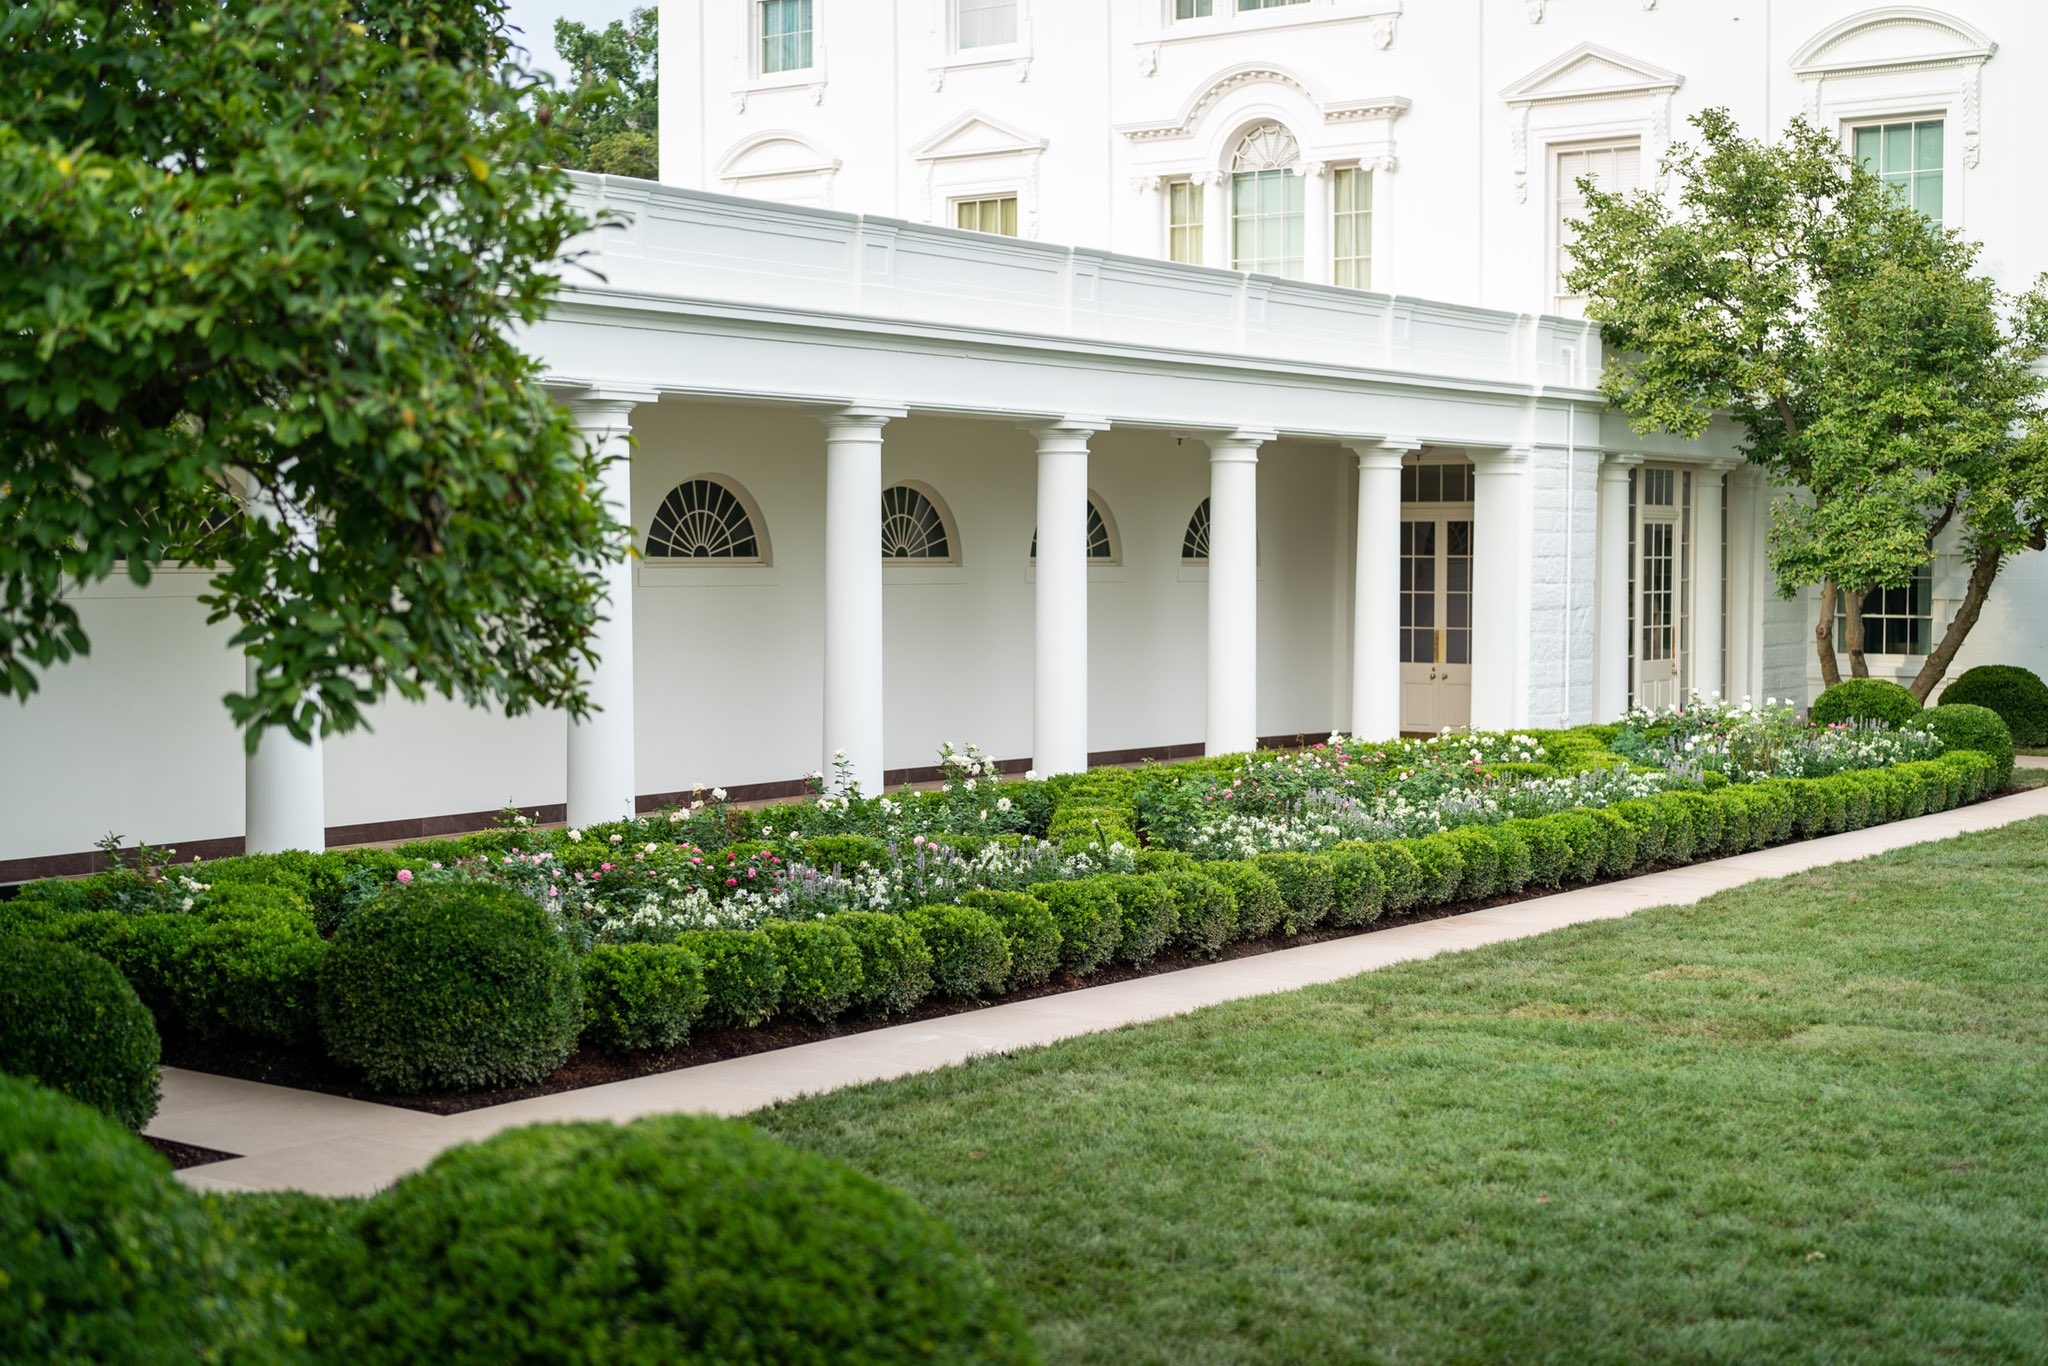 US First Lady Melania Trump unveils revamped White House Rose Garden